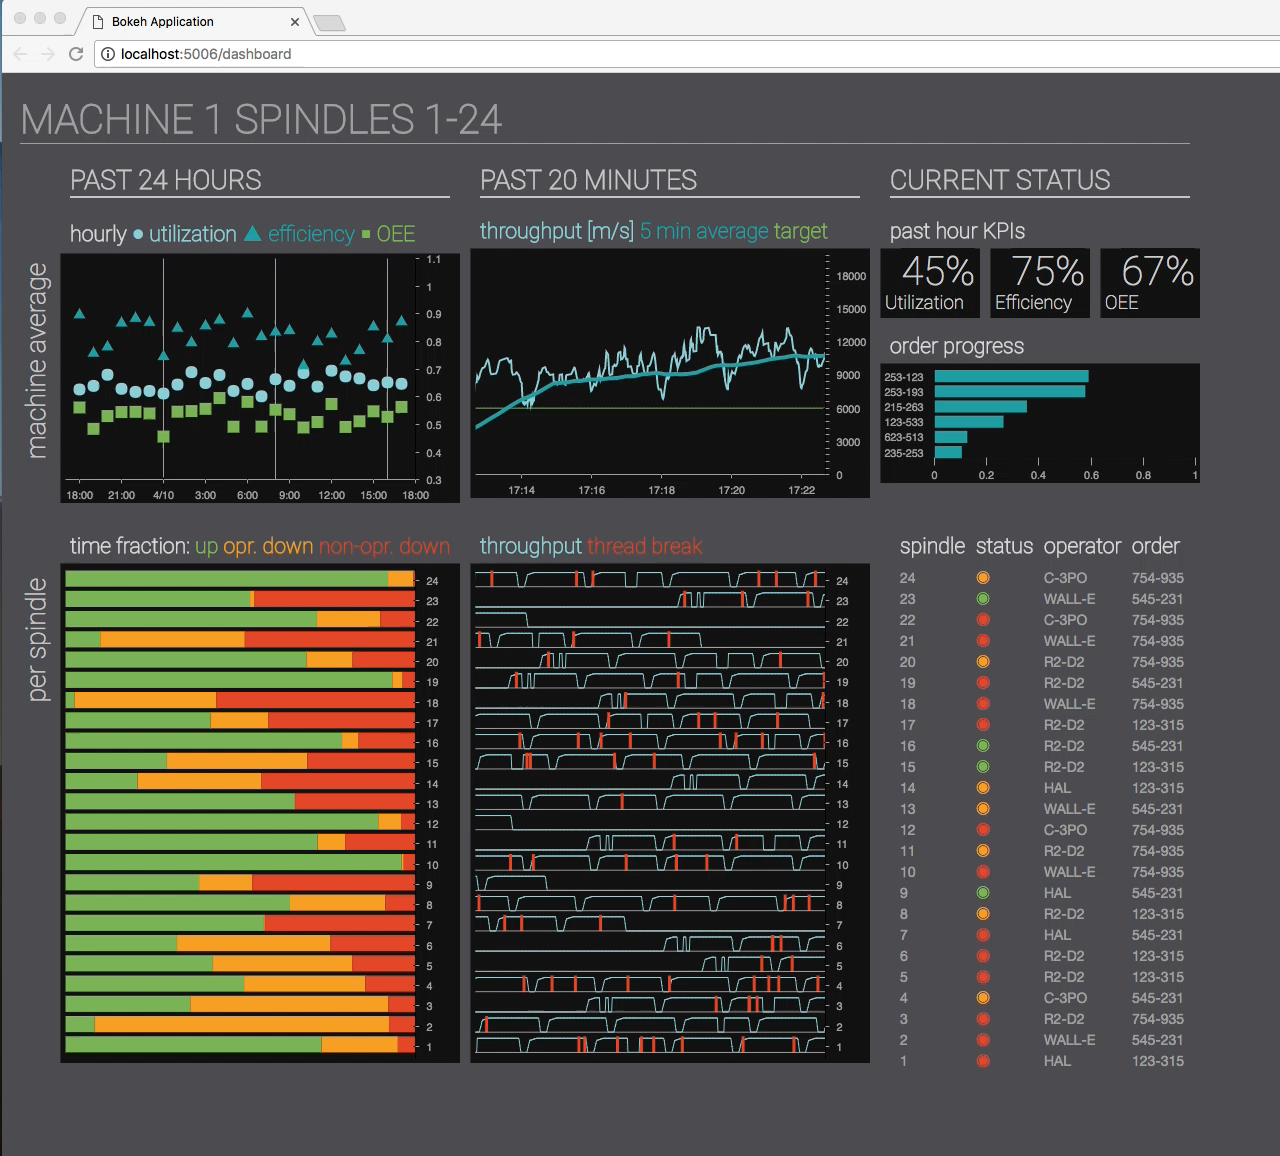 Snapshot of a streaming IoT dashboard showing graphs and color coded statuses